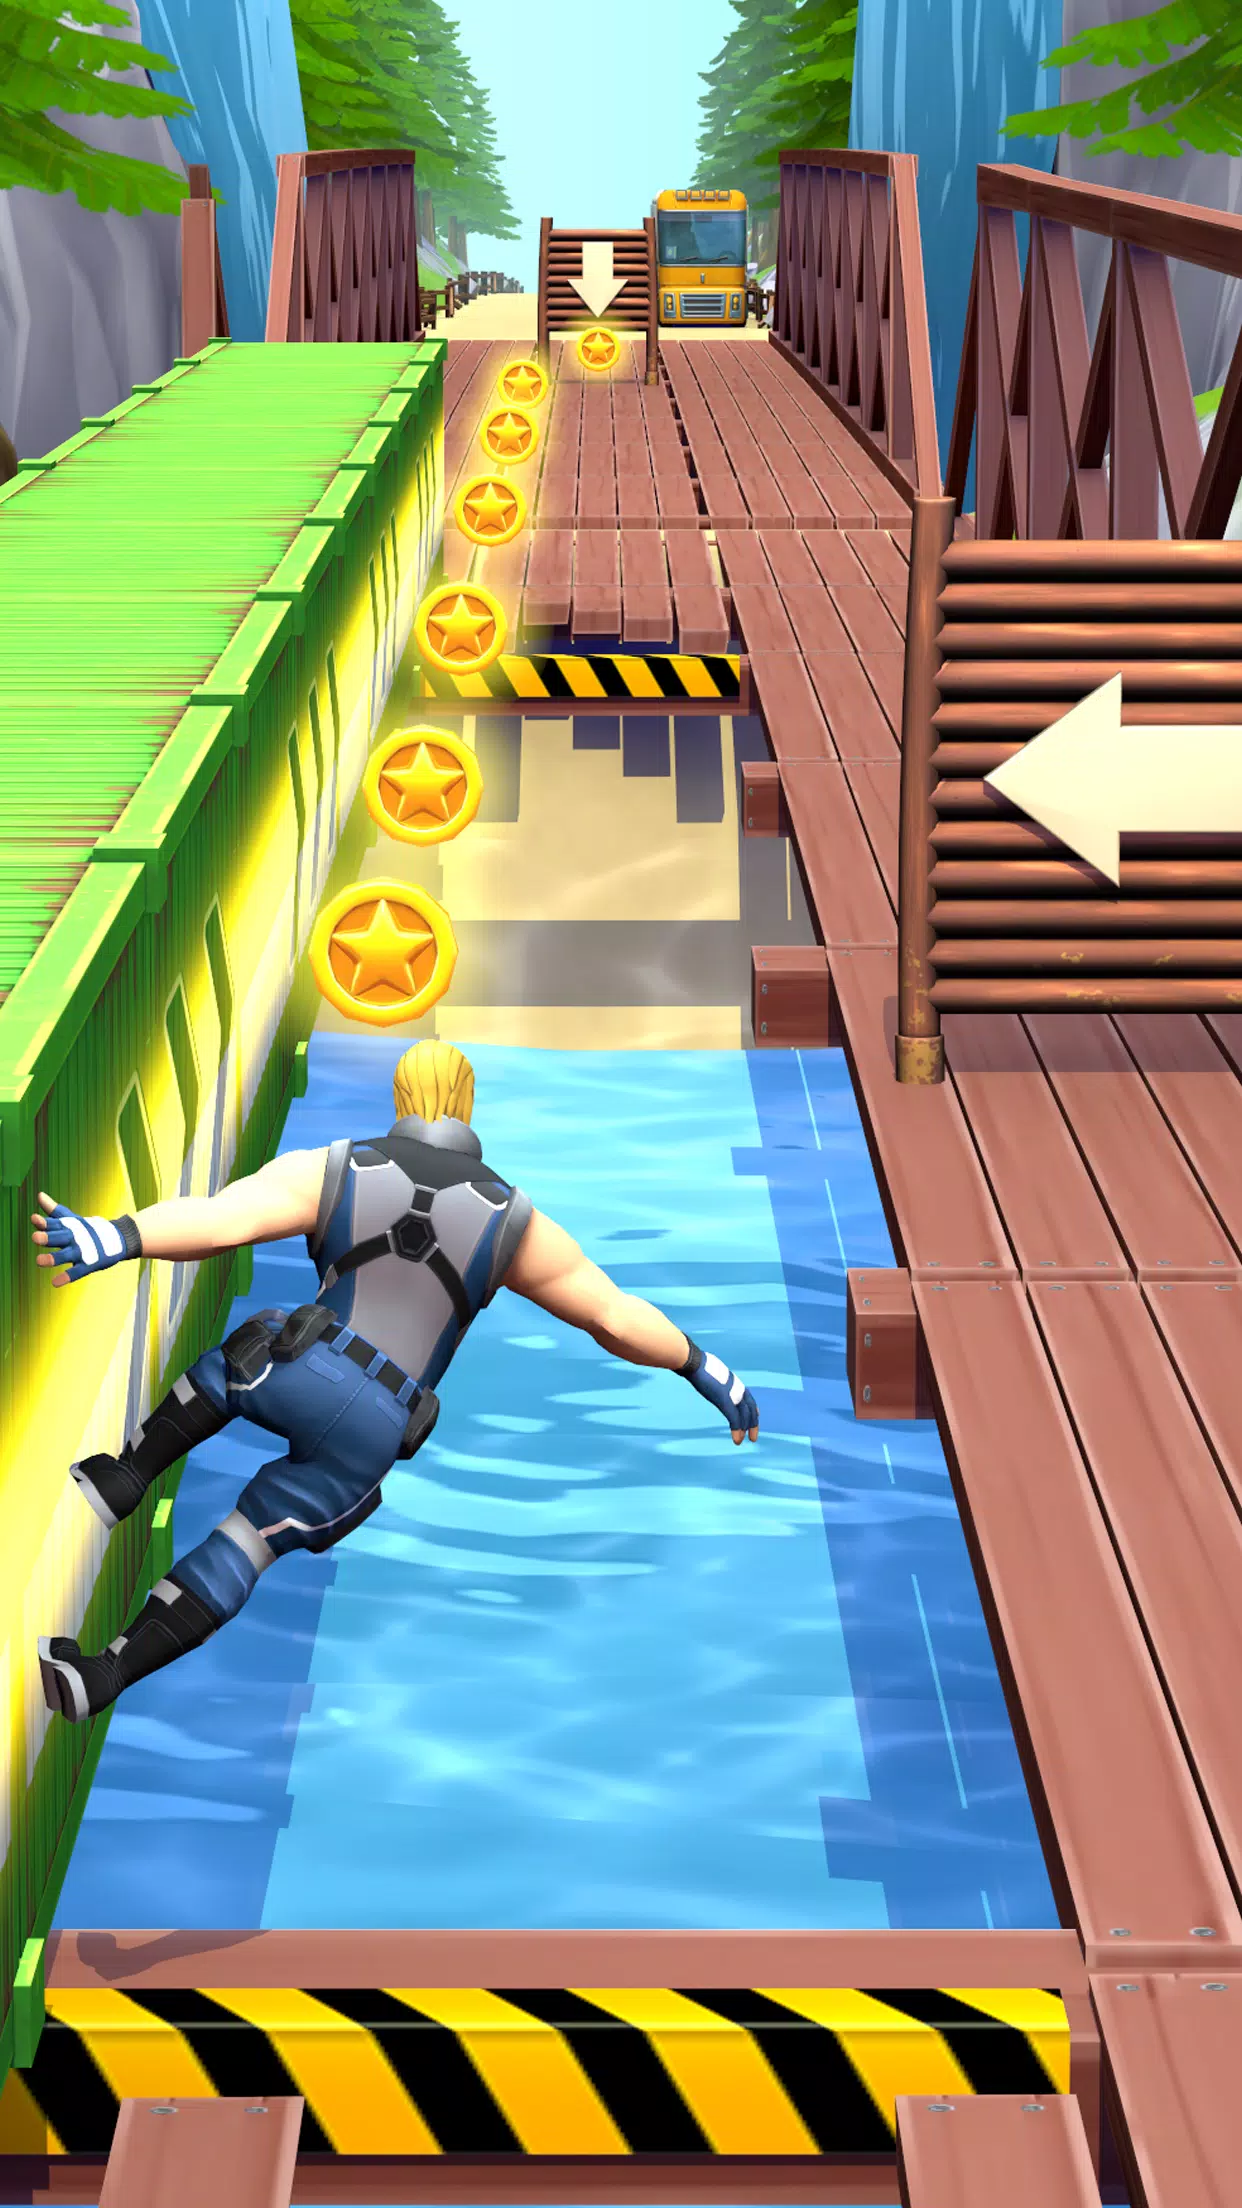 Battle Runner - Endless Run for Android - Free App Download